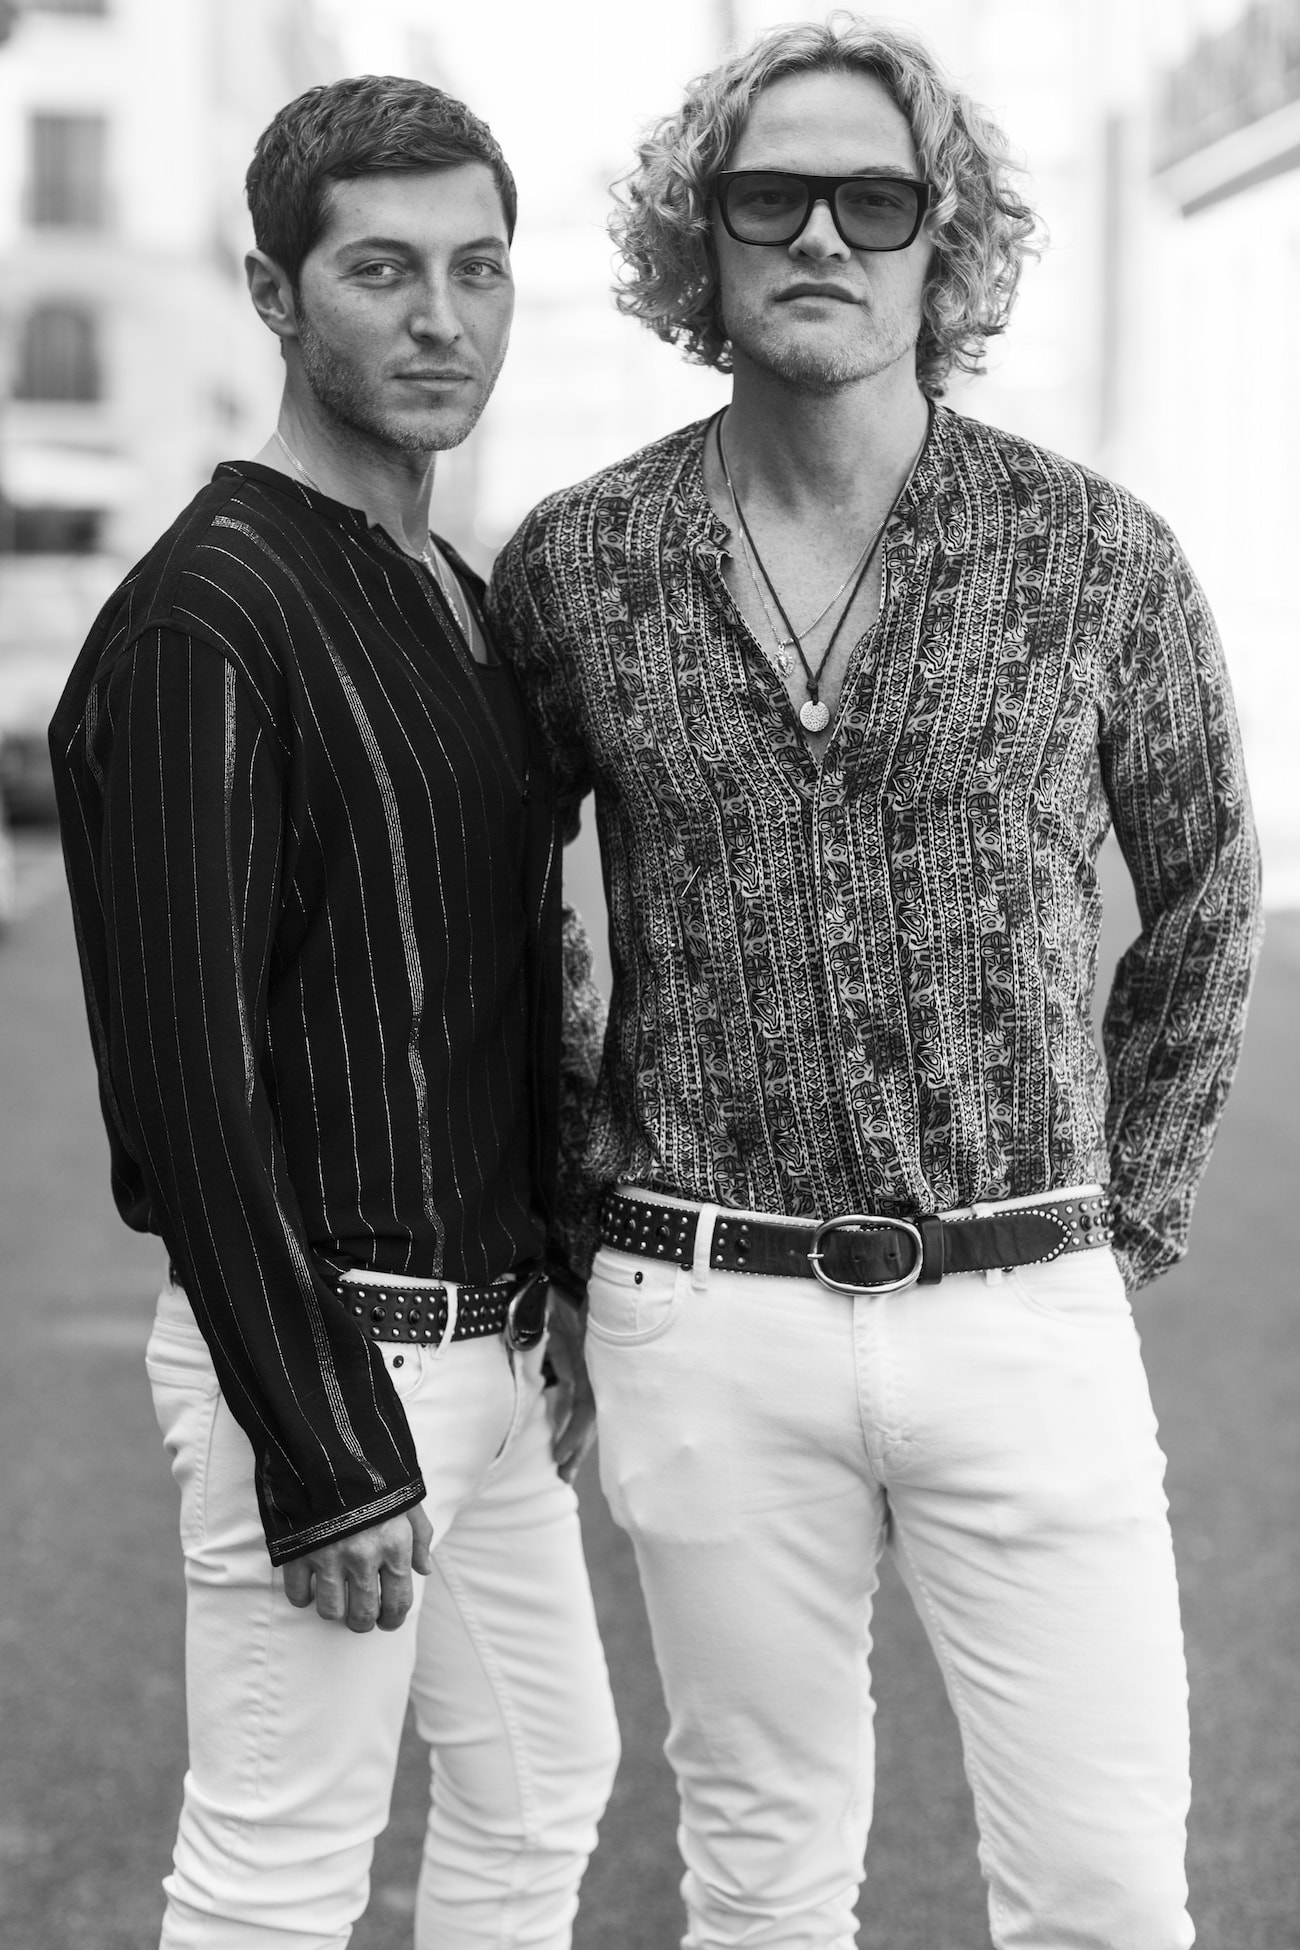 EXCLUSIVE INTERVIEW WITH PETER DUNDAS